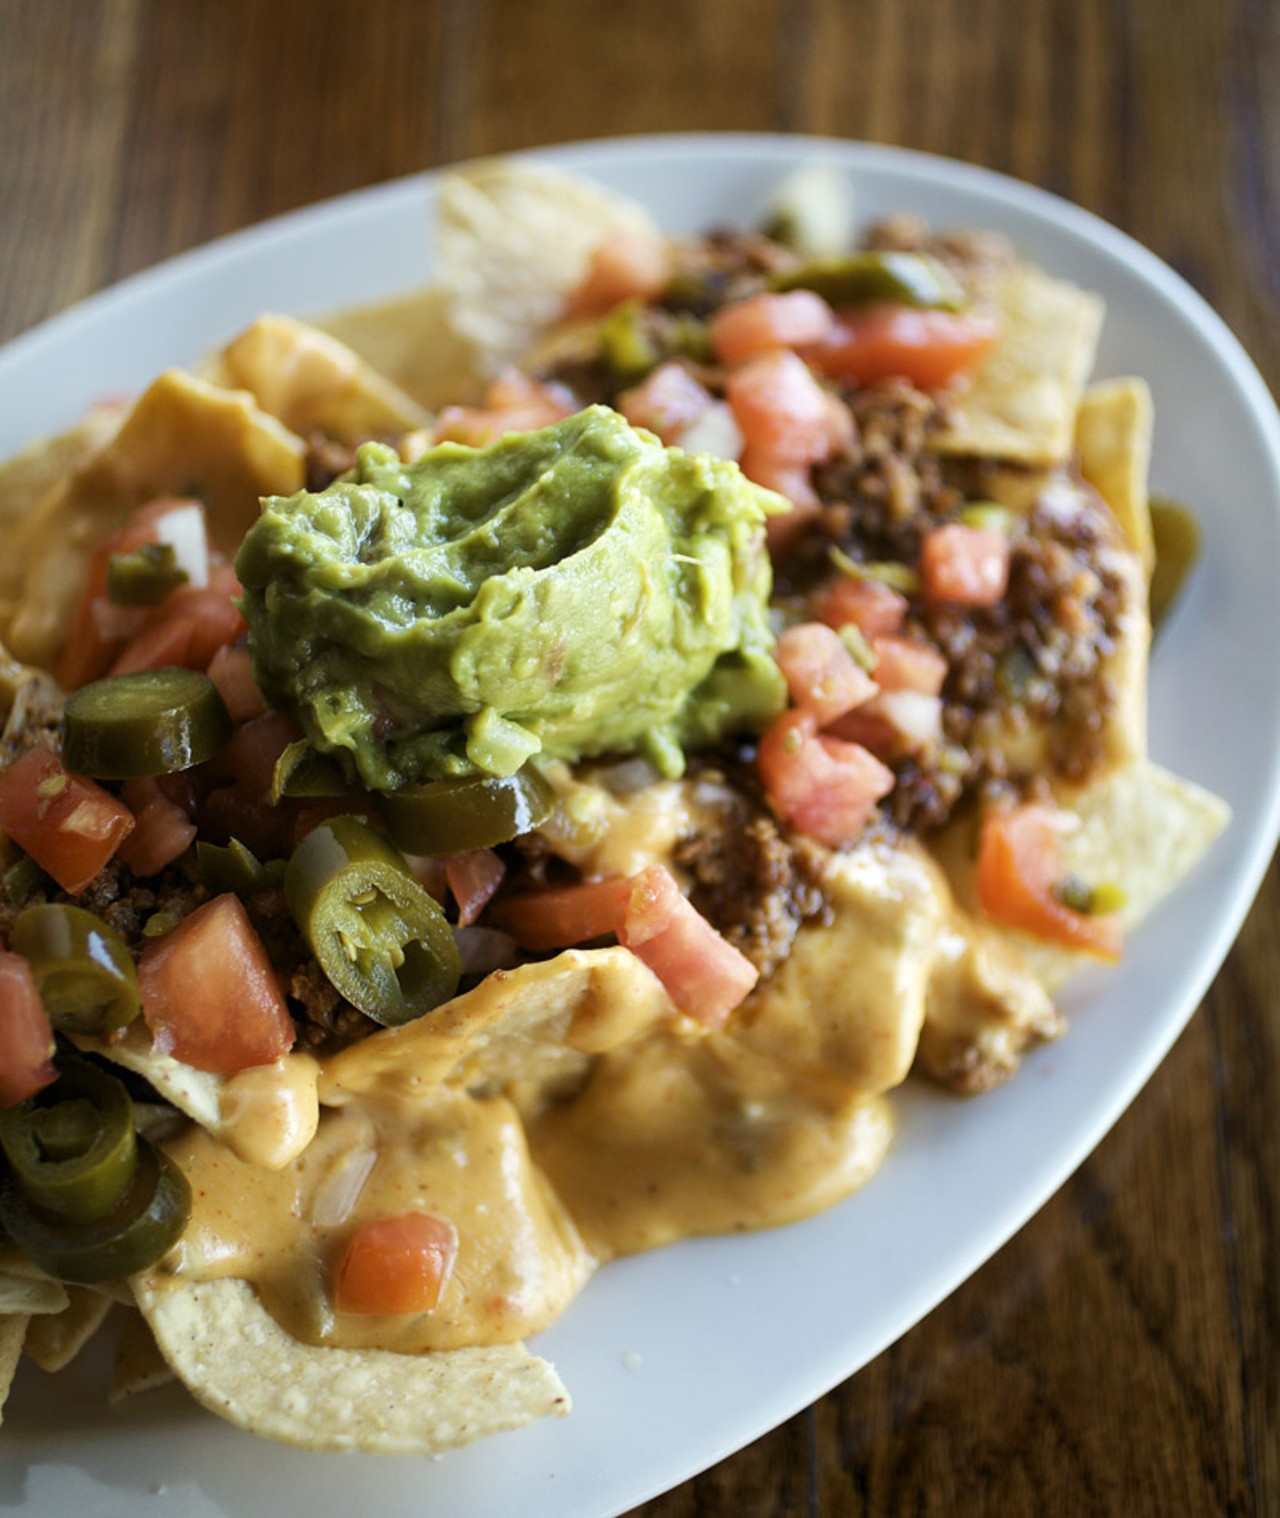 Chorizo Nachos - Spicy Chorizo, queso blanco, pico de gallo, guacamole, jalapenos and house-made chips. Also available on both the regular and late night menus.